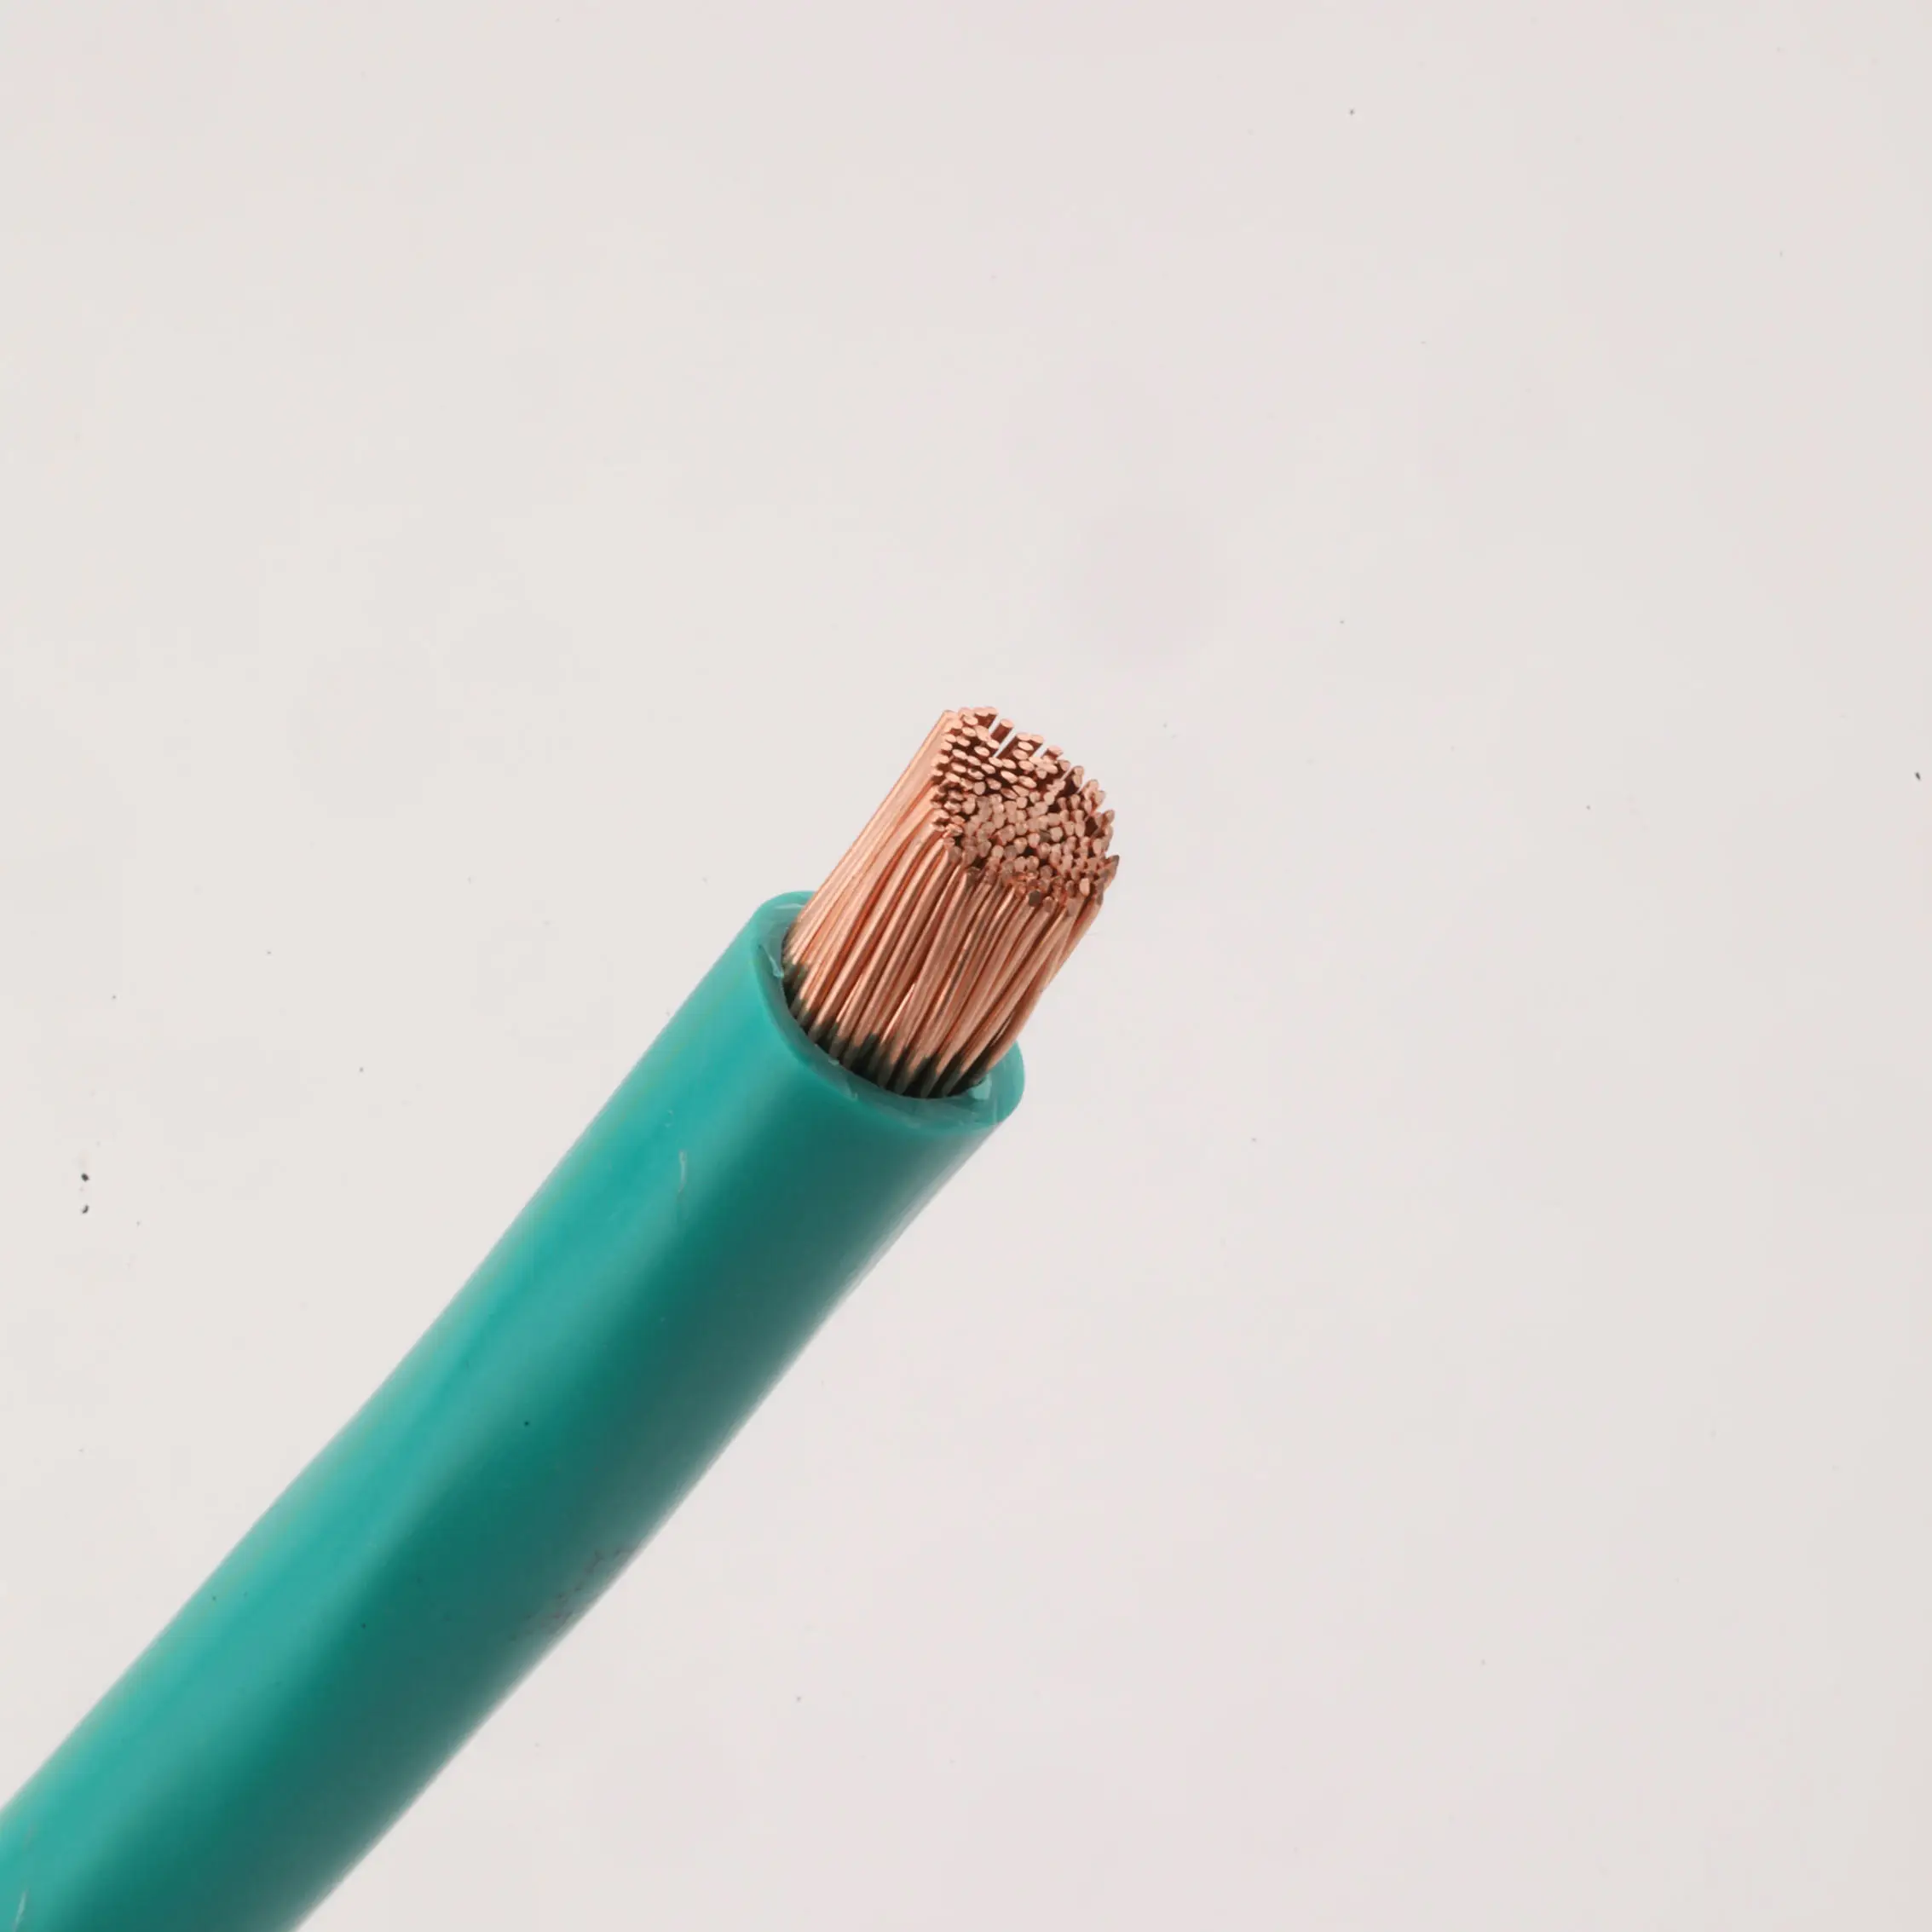 Bvr Stranded Solid Conductor House Wiring Wires And Cables 1.5mm 2.5mm 4mm 6mm 10mm 16mm 25mm